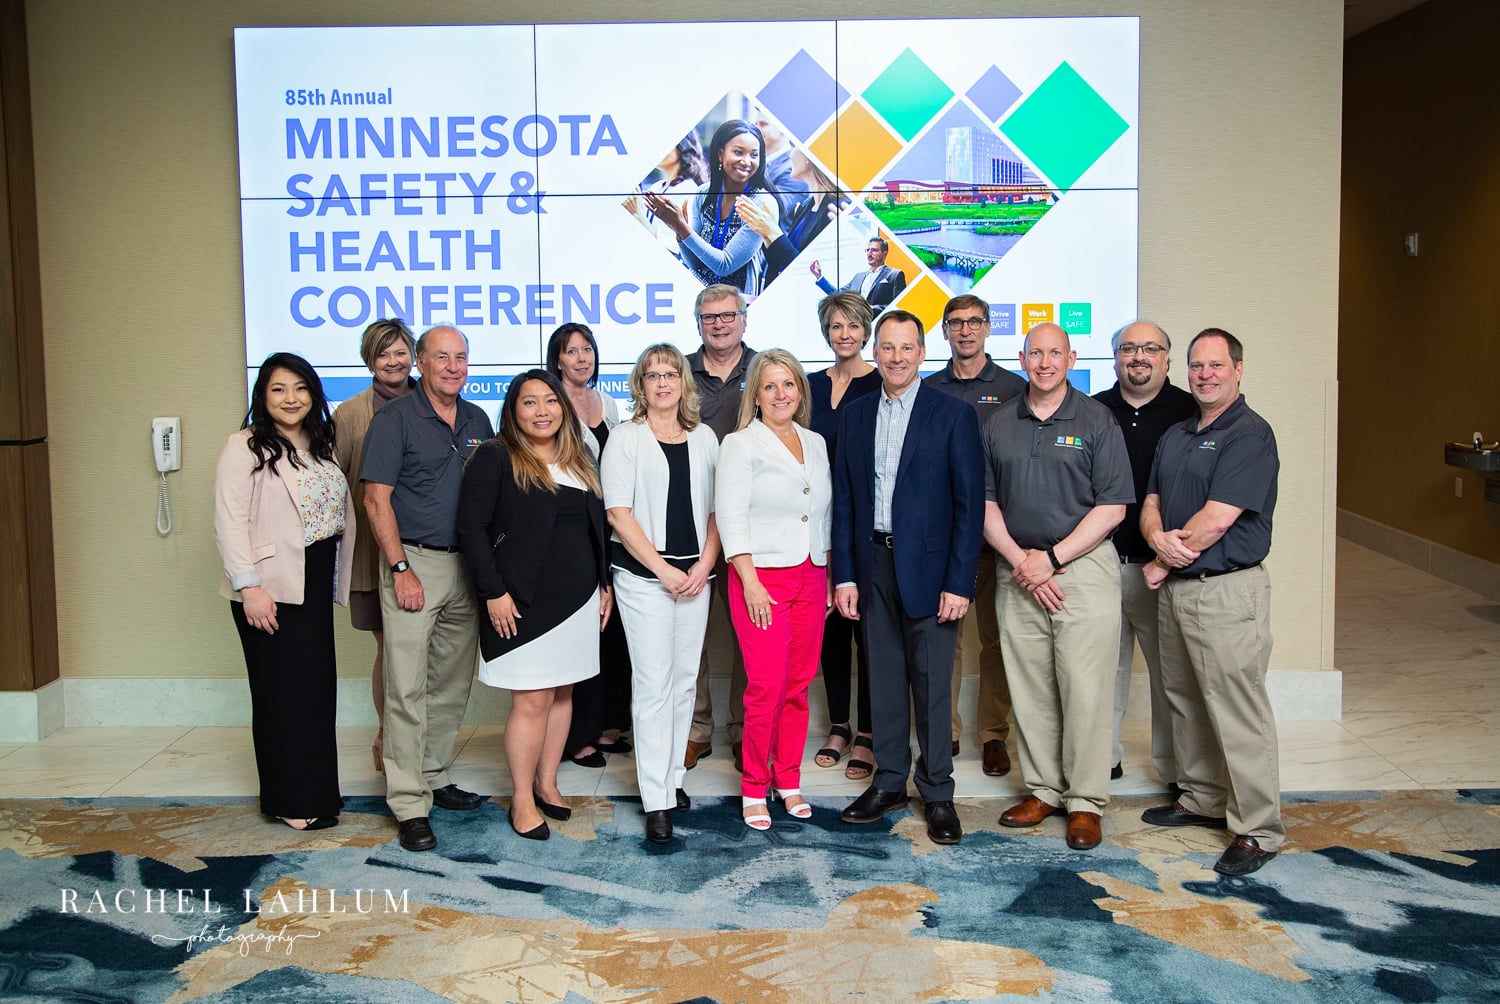 MN Safety Council 2022 Annual Conference Rachel Lahlum 